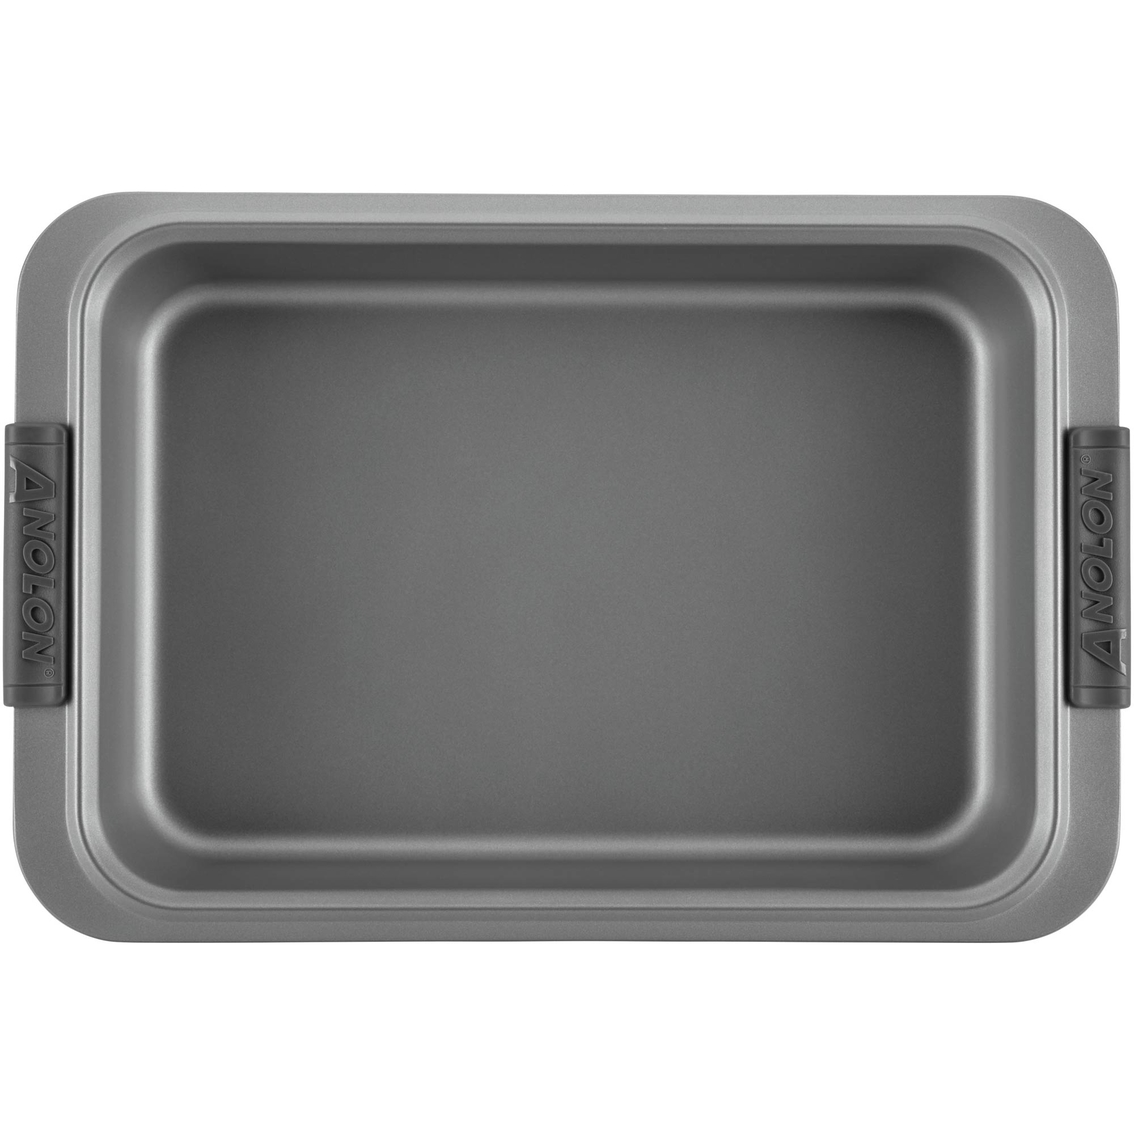 Anolon Advanced Nonstick Bakeware Silicone Grips Covered Cake Pan - Image 2 of 4